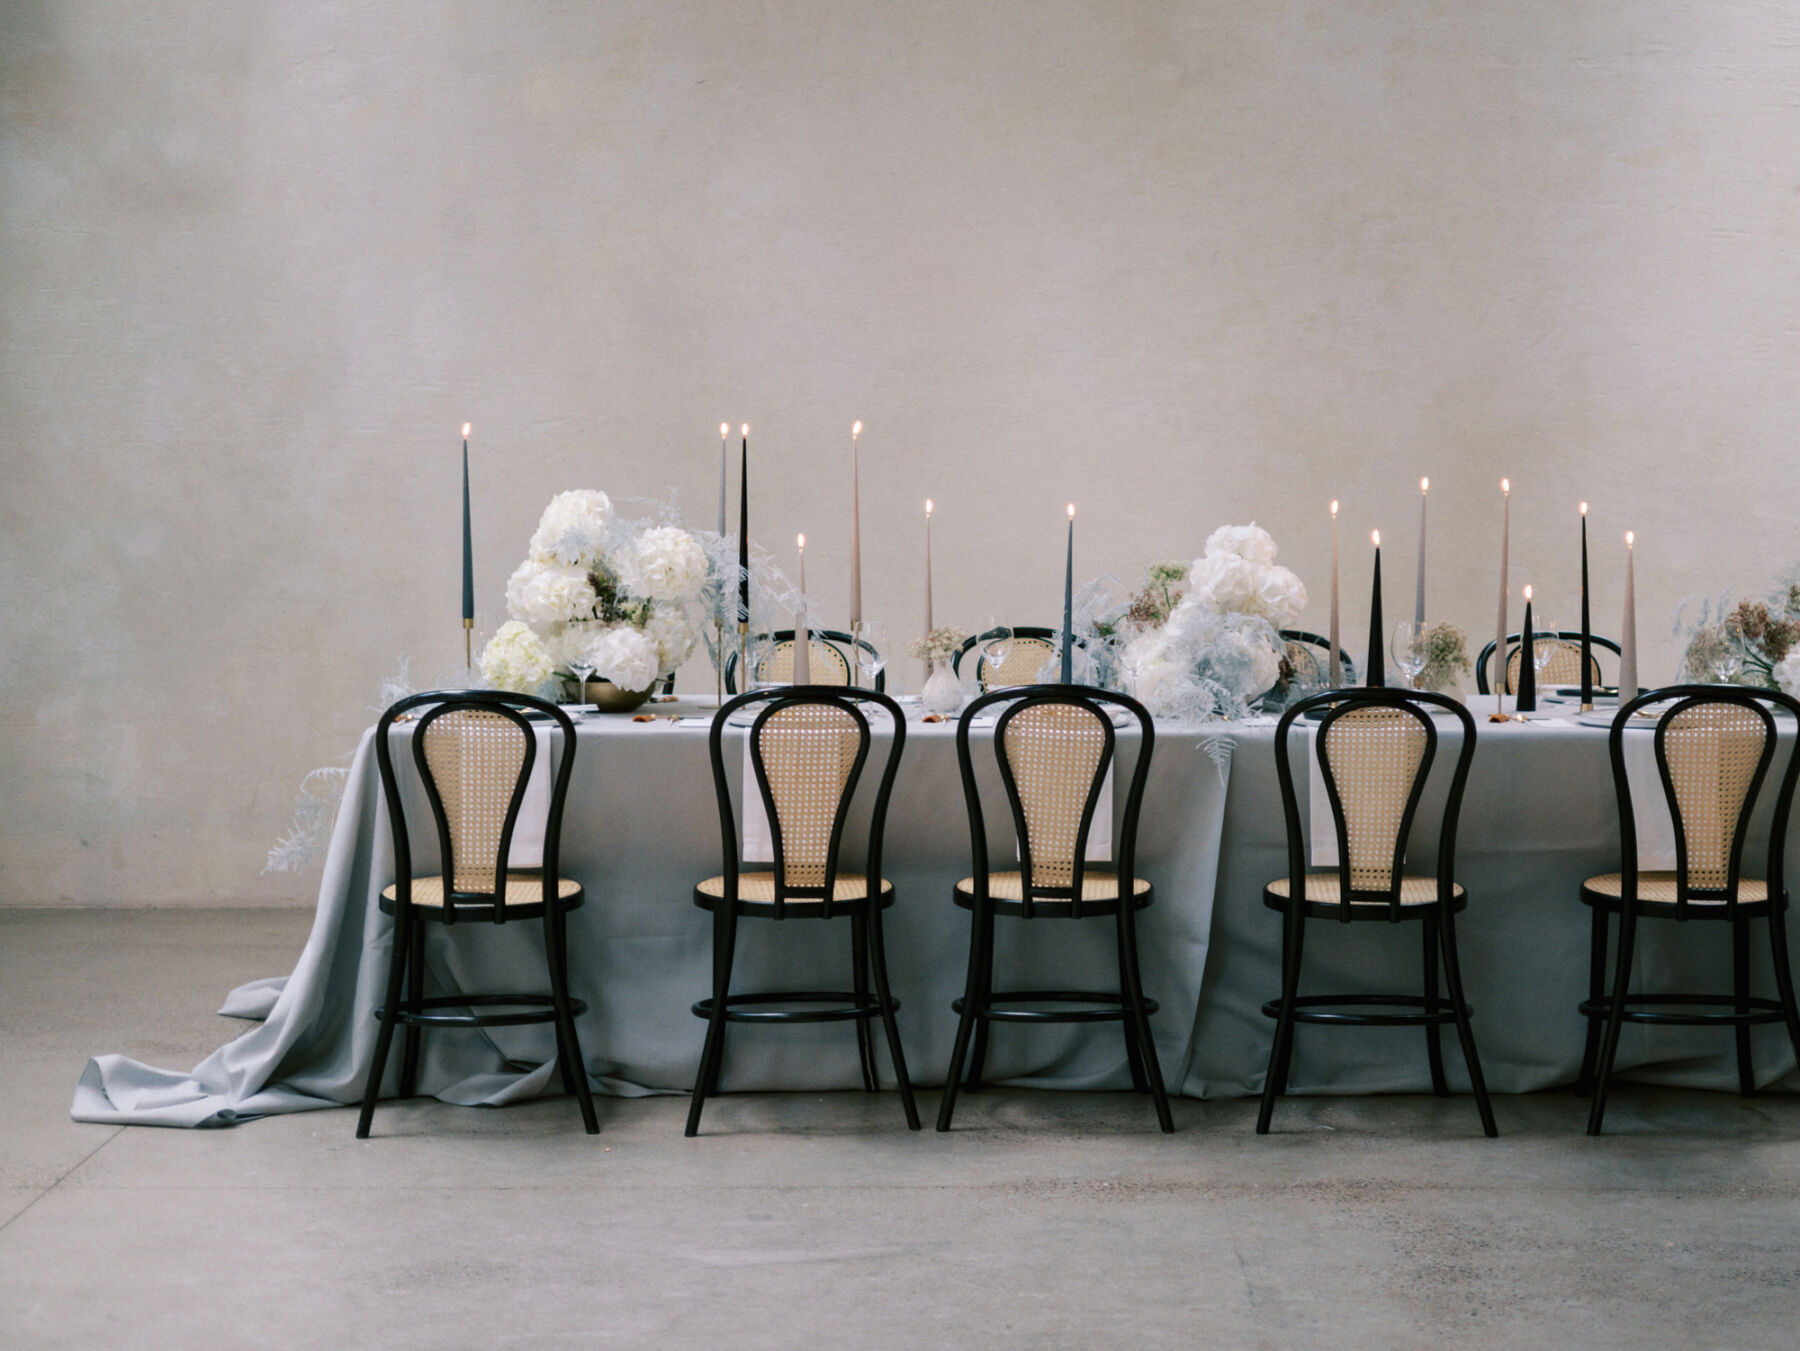 Chic, modern wedding table decor in pale blues, dove grey. Ester & Erik tapered candles.